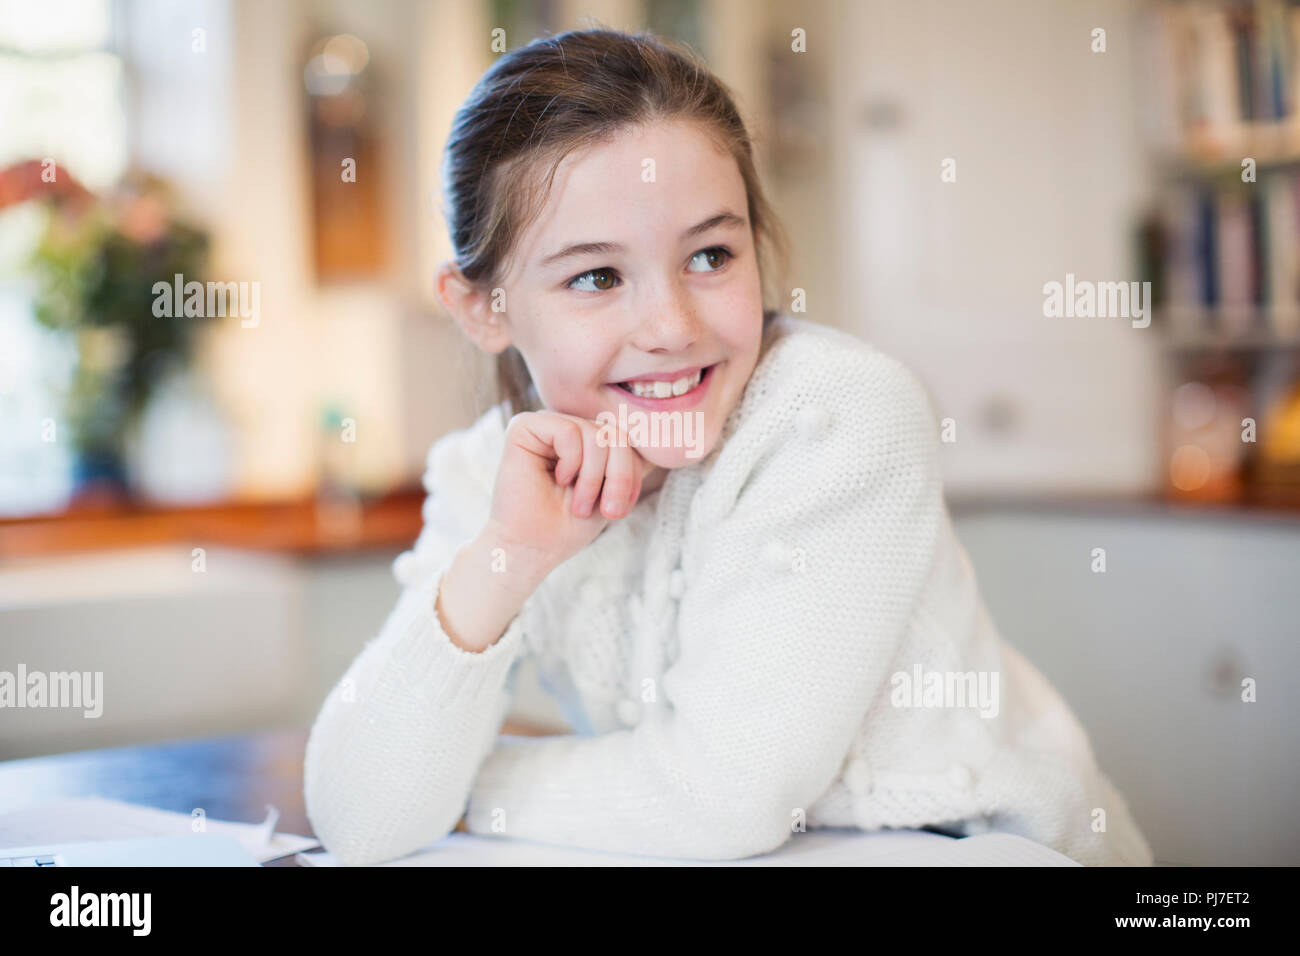 Portrait smiling, confident girl looking away Stock Photo